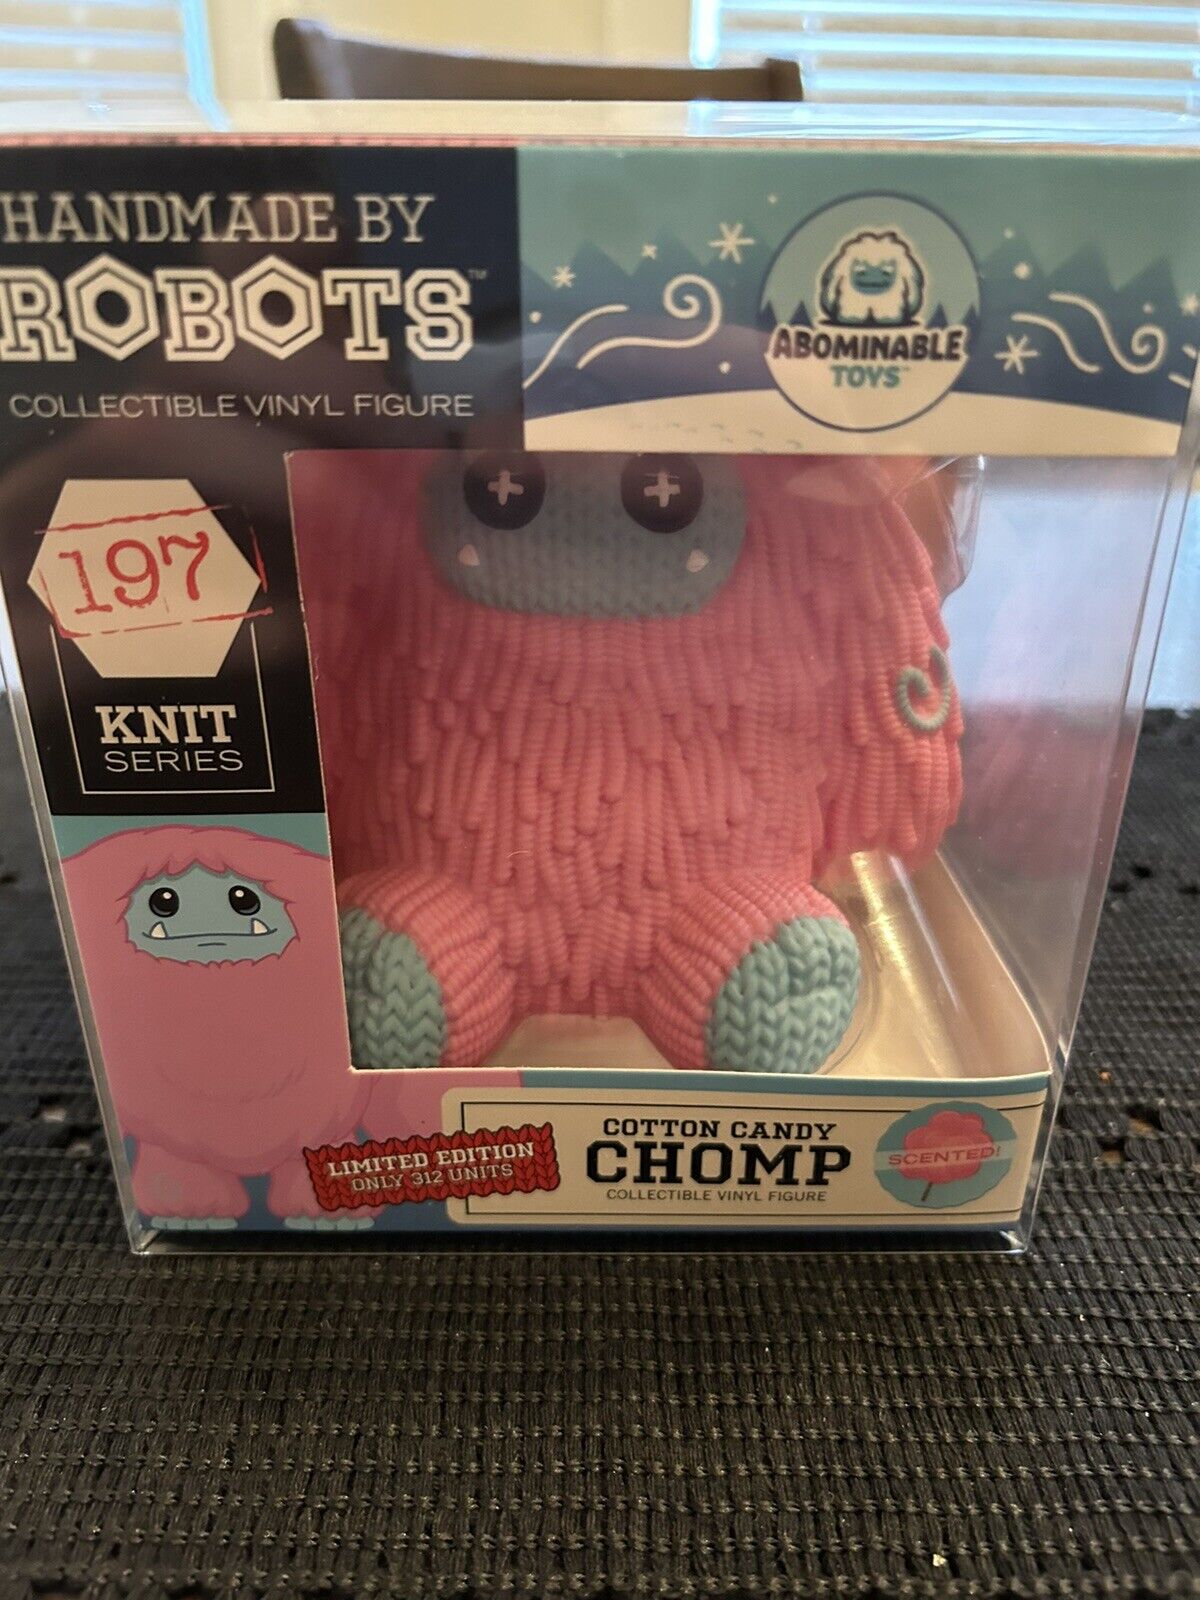 Abominable Toys HMBR Cotton Candy Chomp LE 312 Units Scented #197 Knit Series🔥